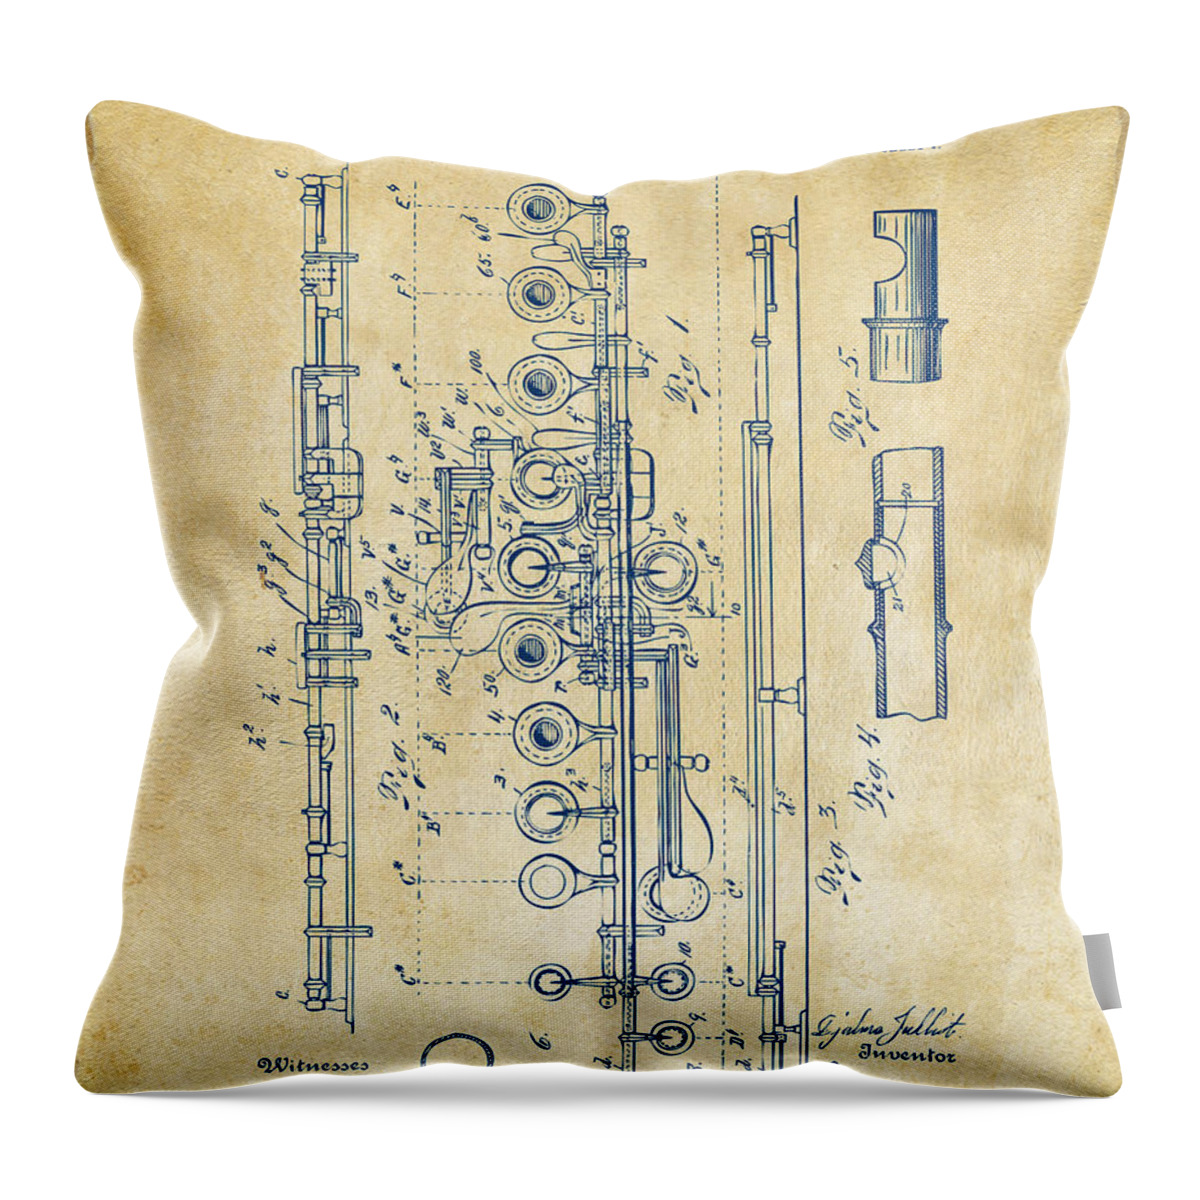 Flute Throw Pillow featuring the digital art 1908 Flute Patent - Vintage by Nikki Marie Smith